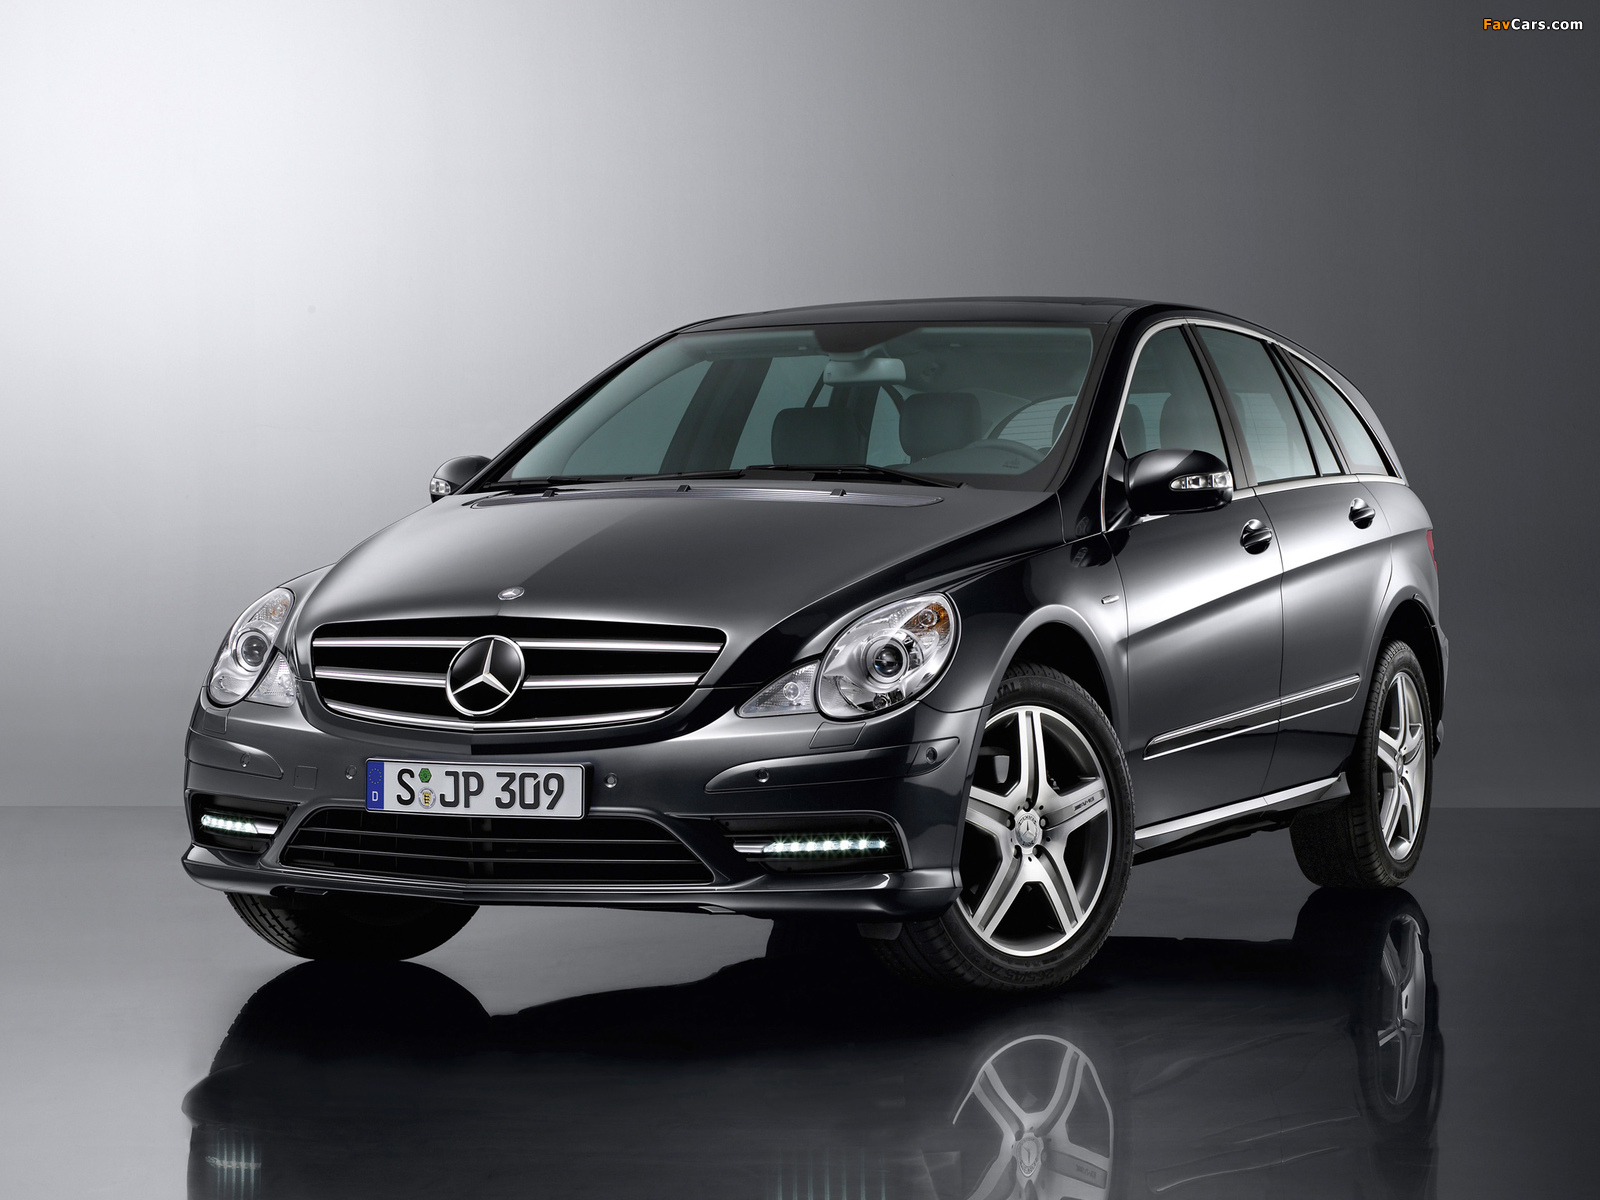 Mercedes-Benz R 350 CDI Grand Edition (W251) 2009 pictures (1600 x 1200)